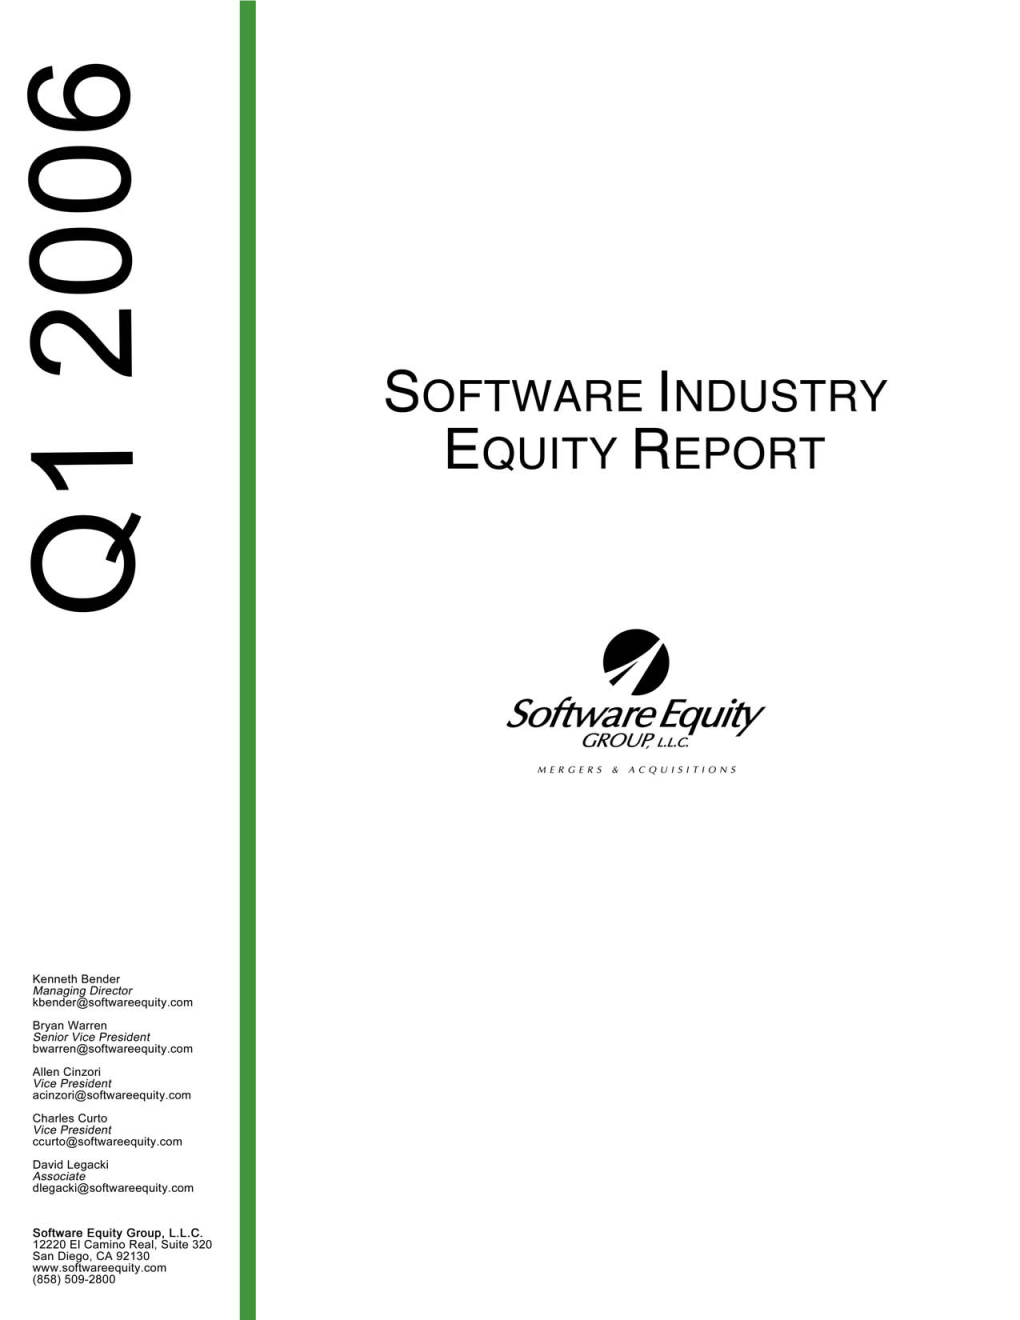 1Q06 Software Industry Equity Report